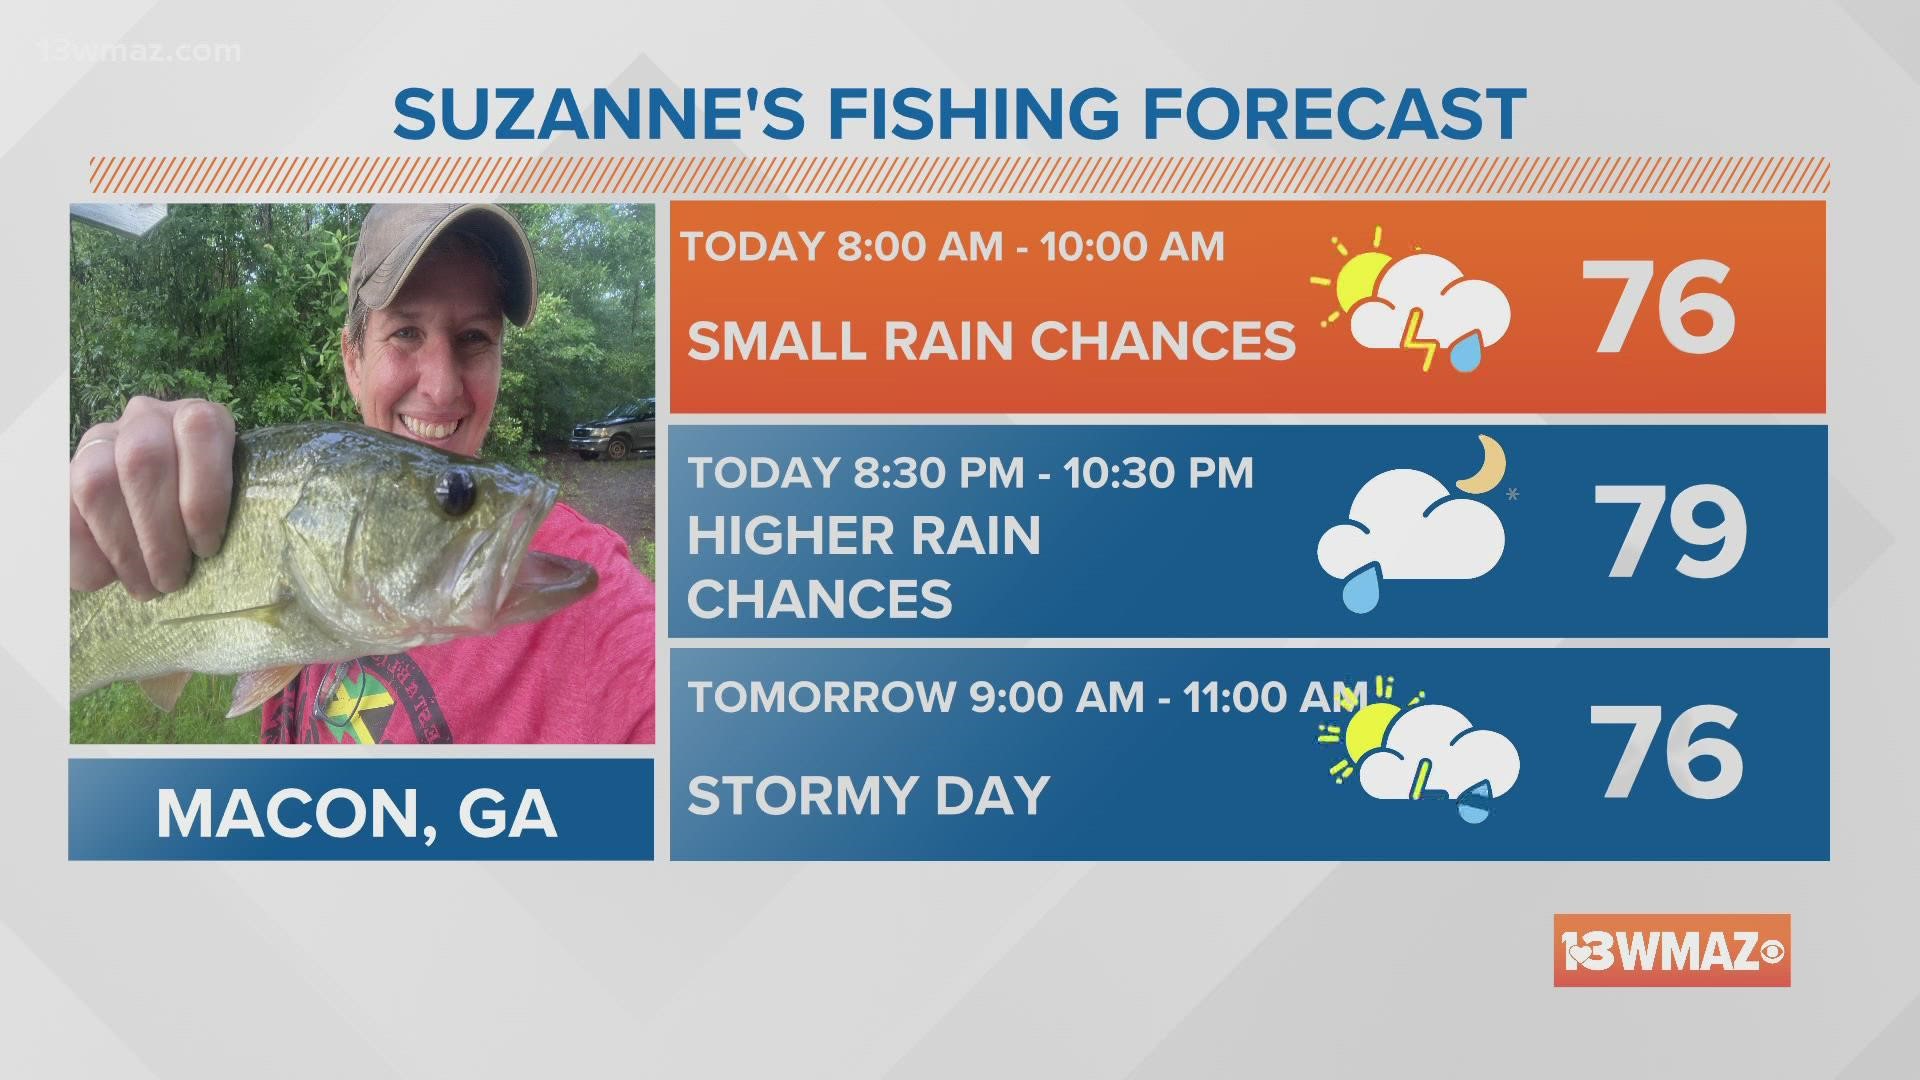 Take a look at the Fishing Forecast and your Big Ol' Fish photos